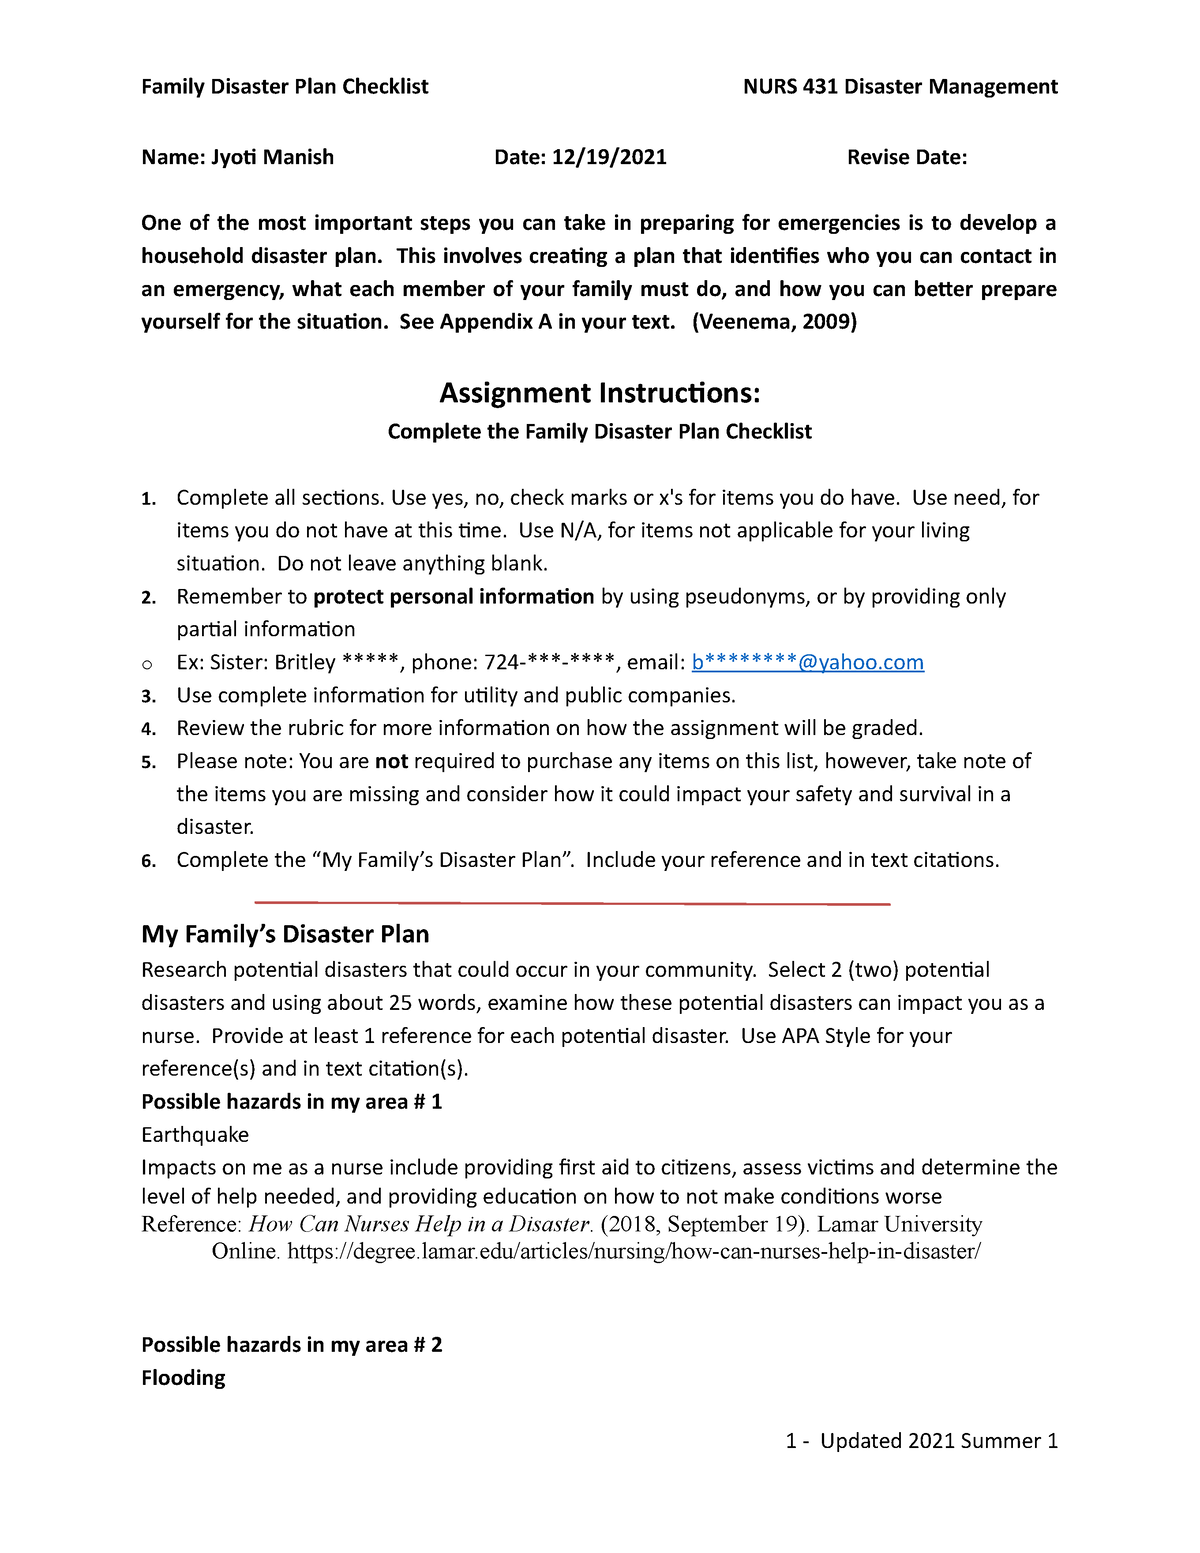 week 7 assignment family disaster plan checklist